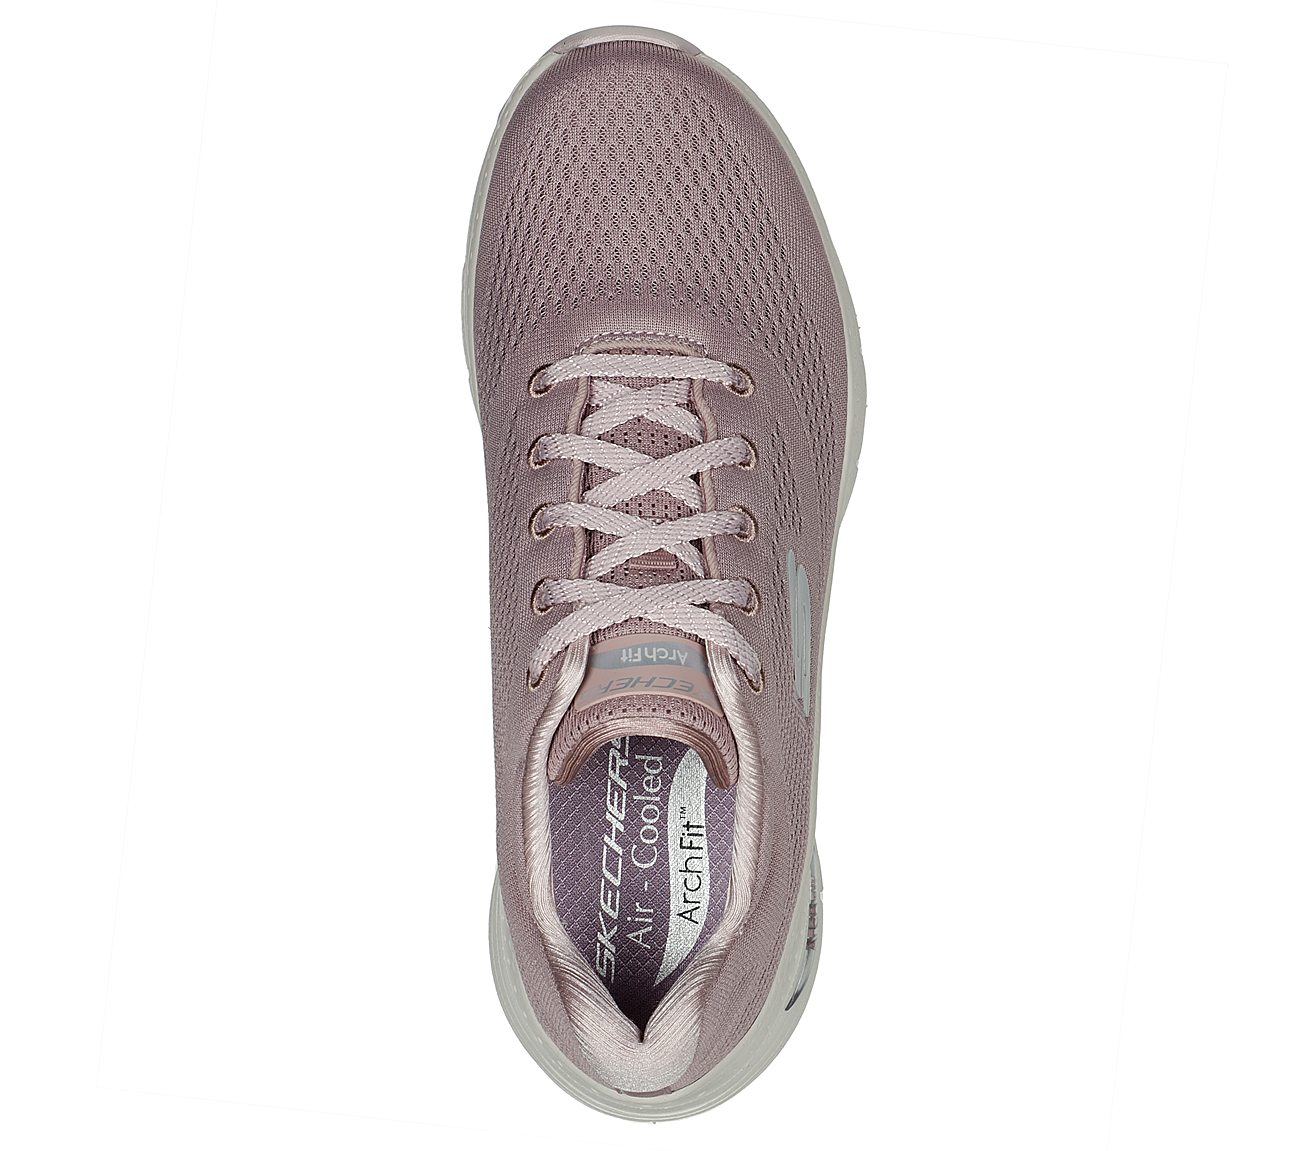 ARCH FIT - BIG APPEAL, MMAUVE Footwear Top View